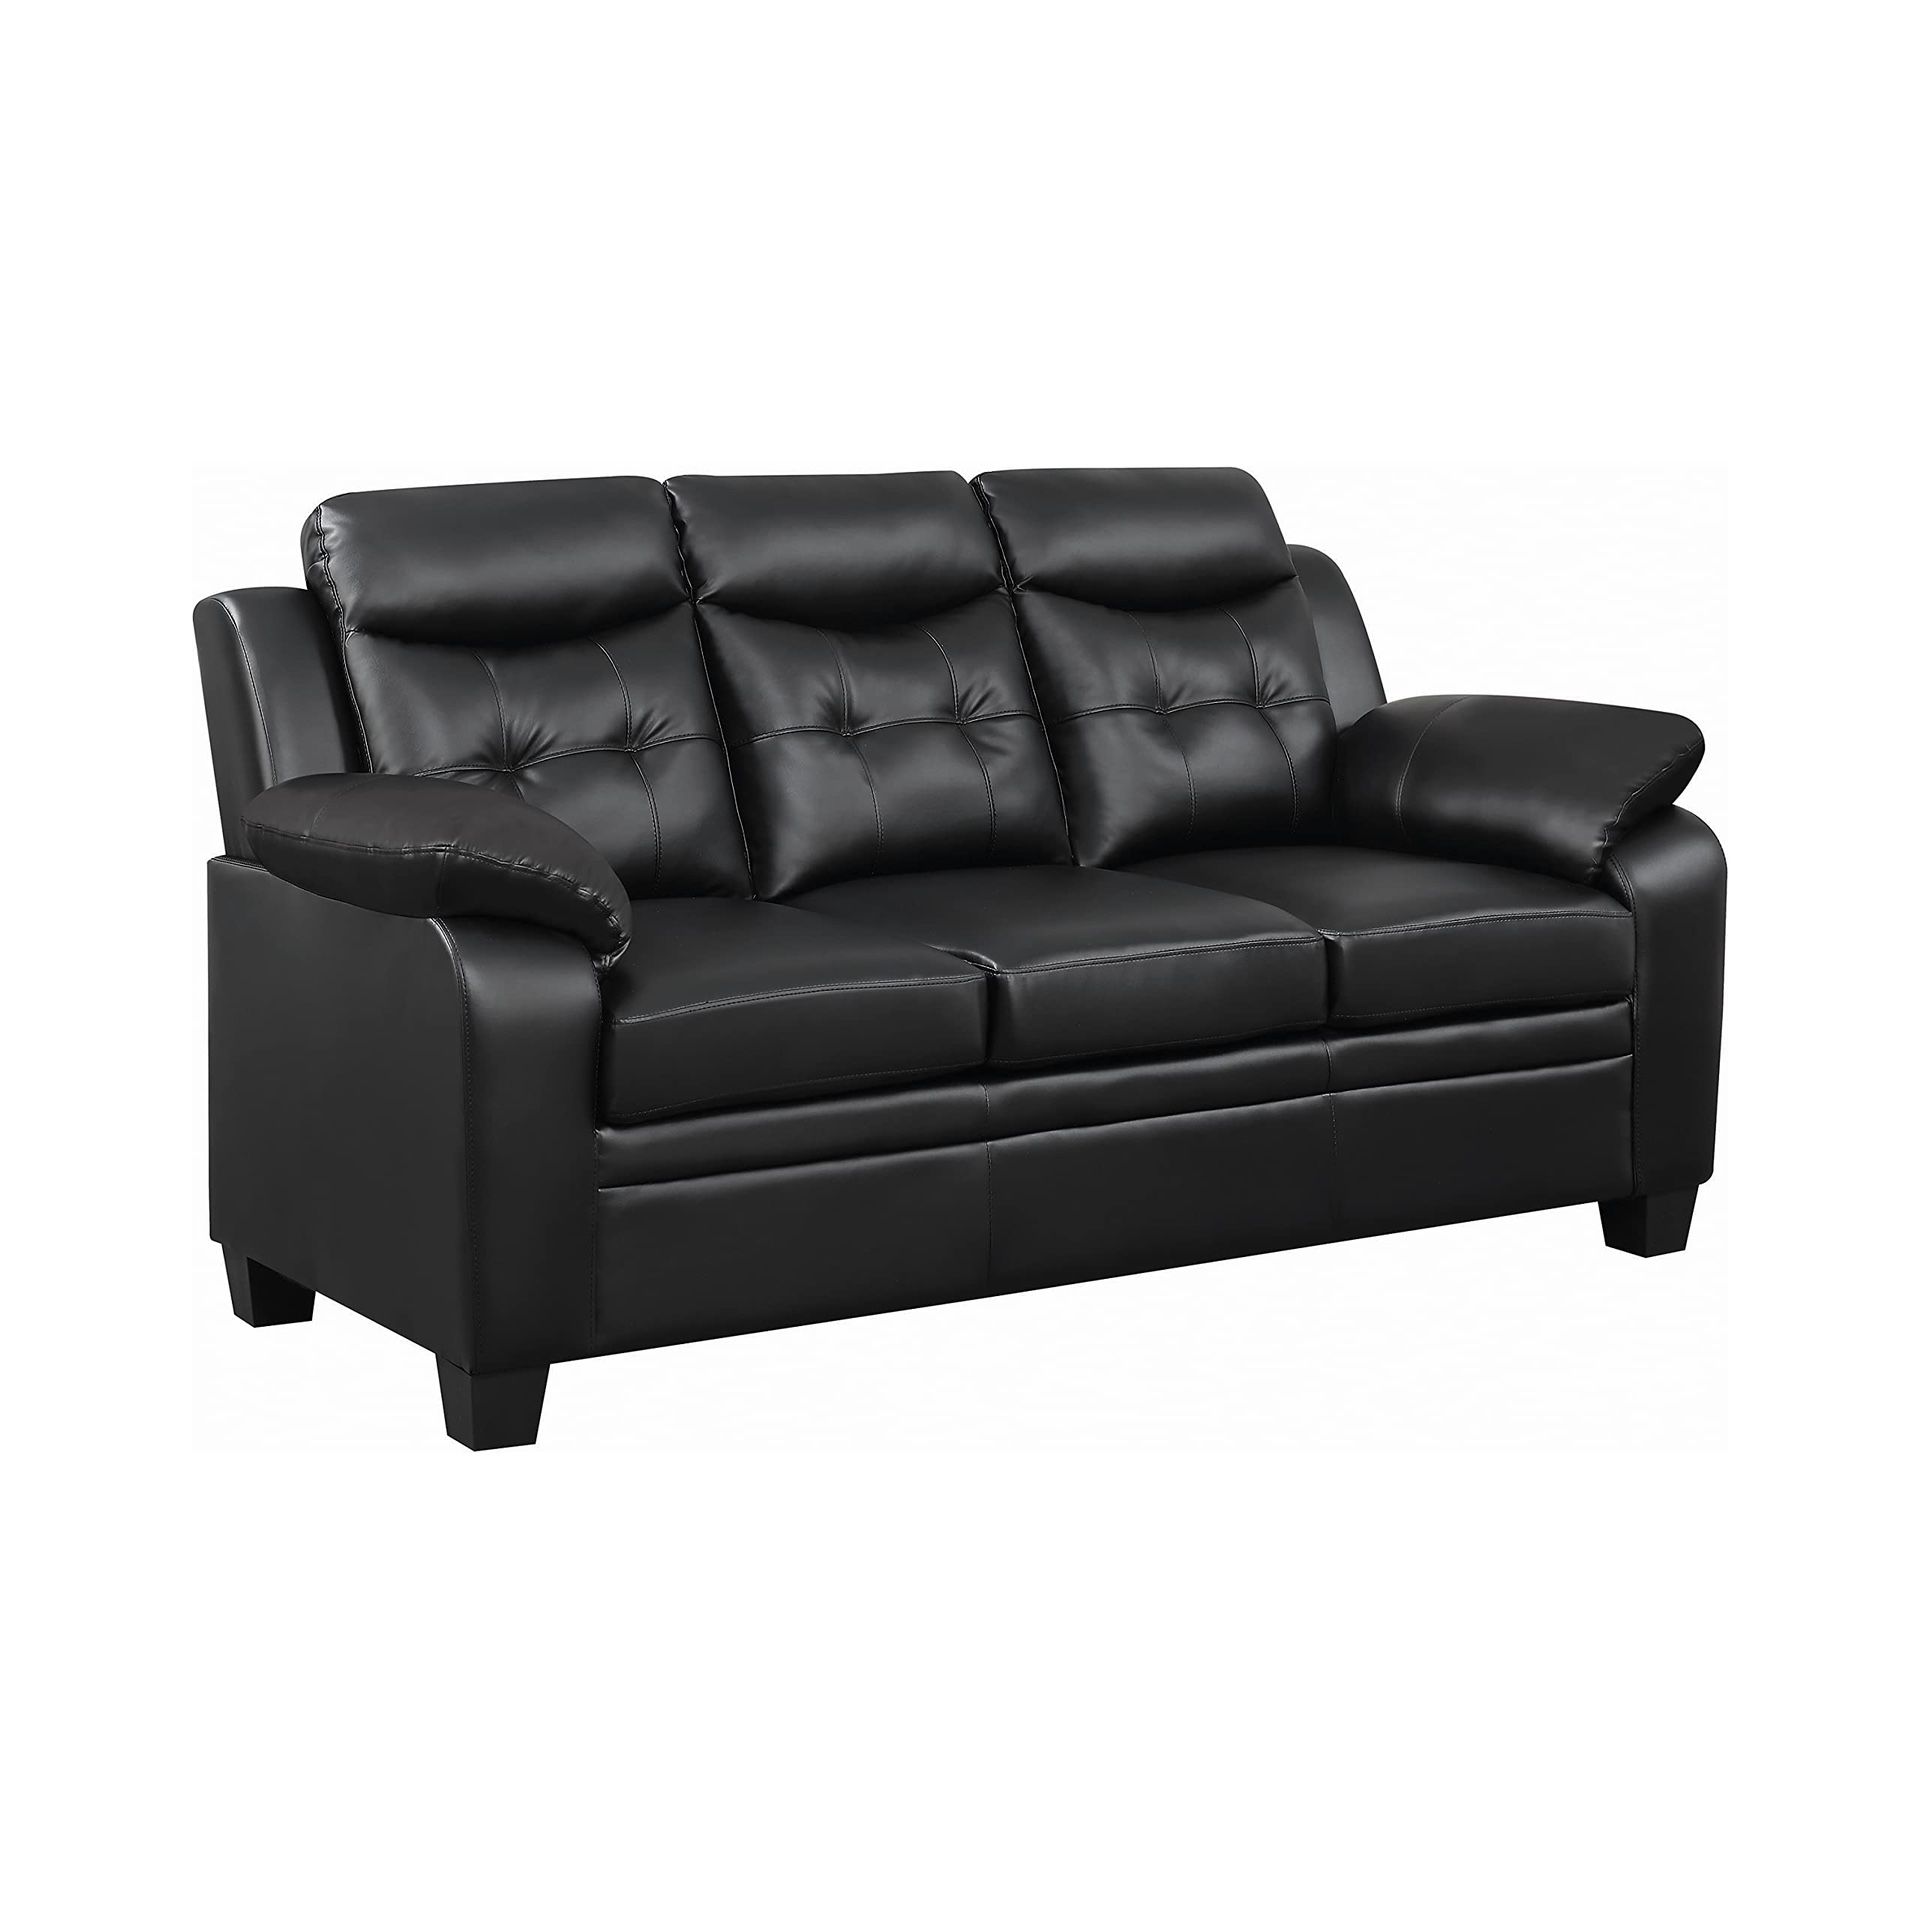 Finley Sofa with Extreme Padding Black 506551. has some minor wear